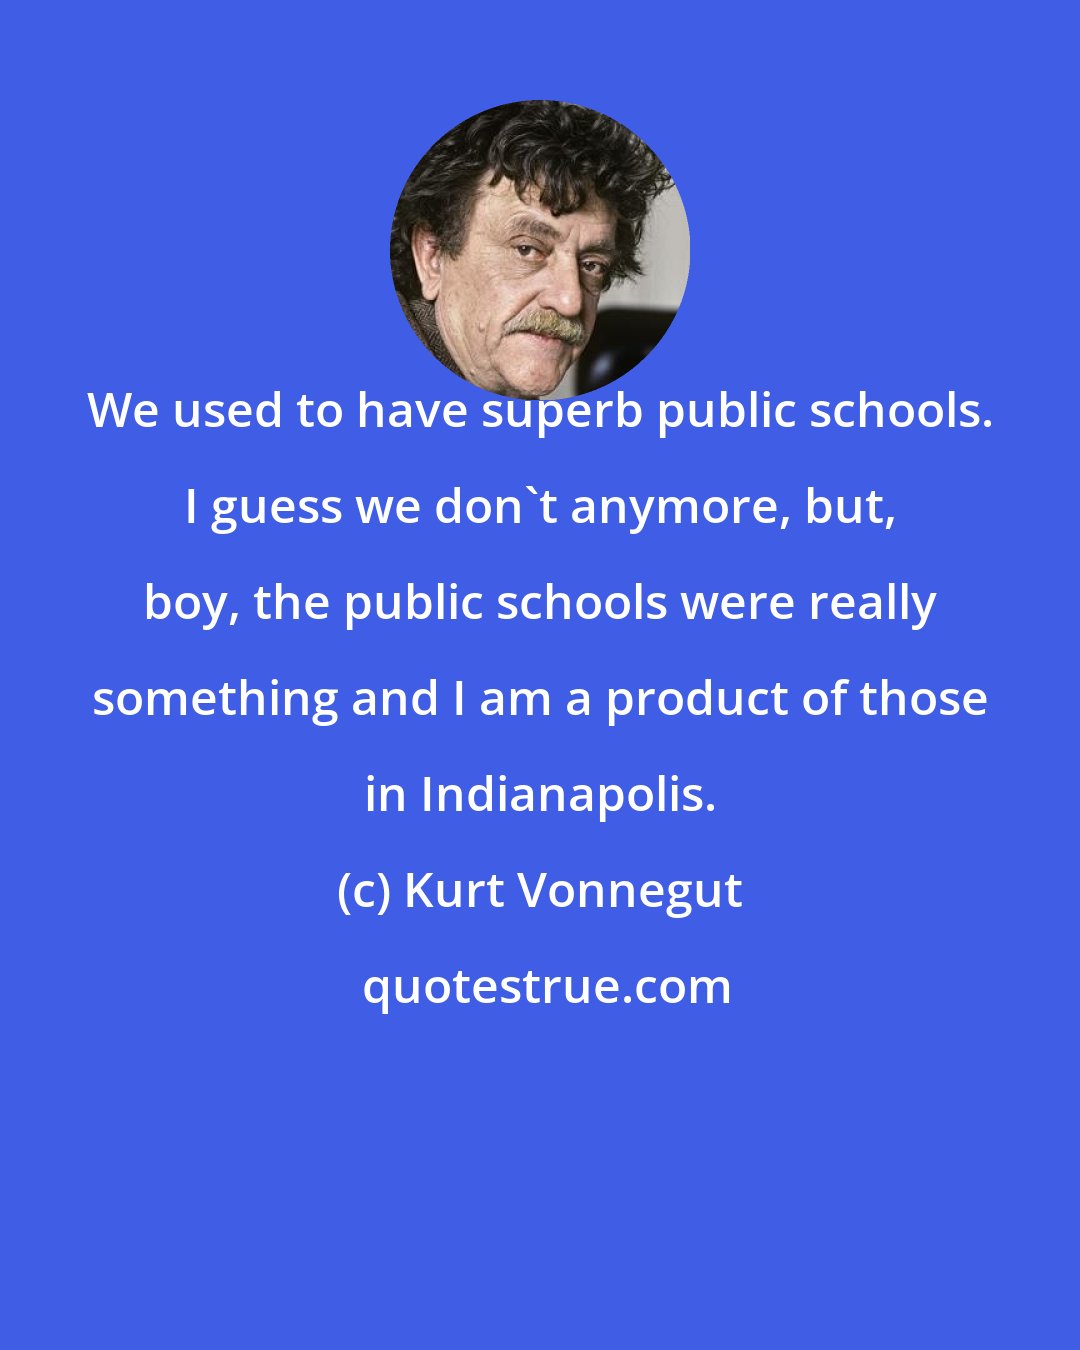 Kurt Vonnegut: We used to have superb public schools. I guess we don't anymore, but, boy, the public schools were really something and I am a product of those in Indianapolis.